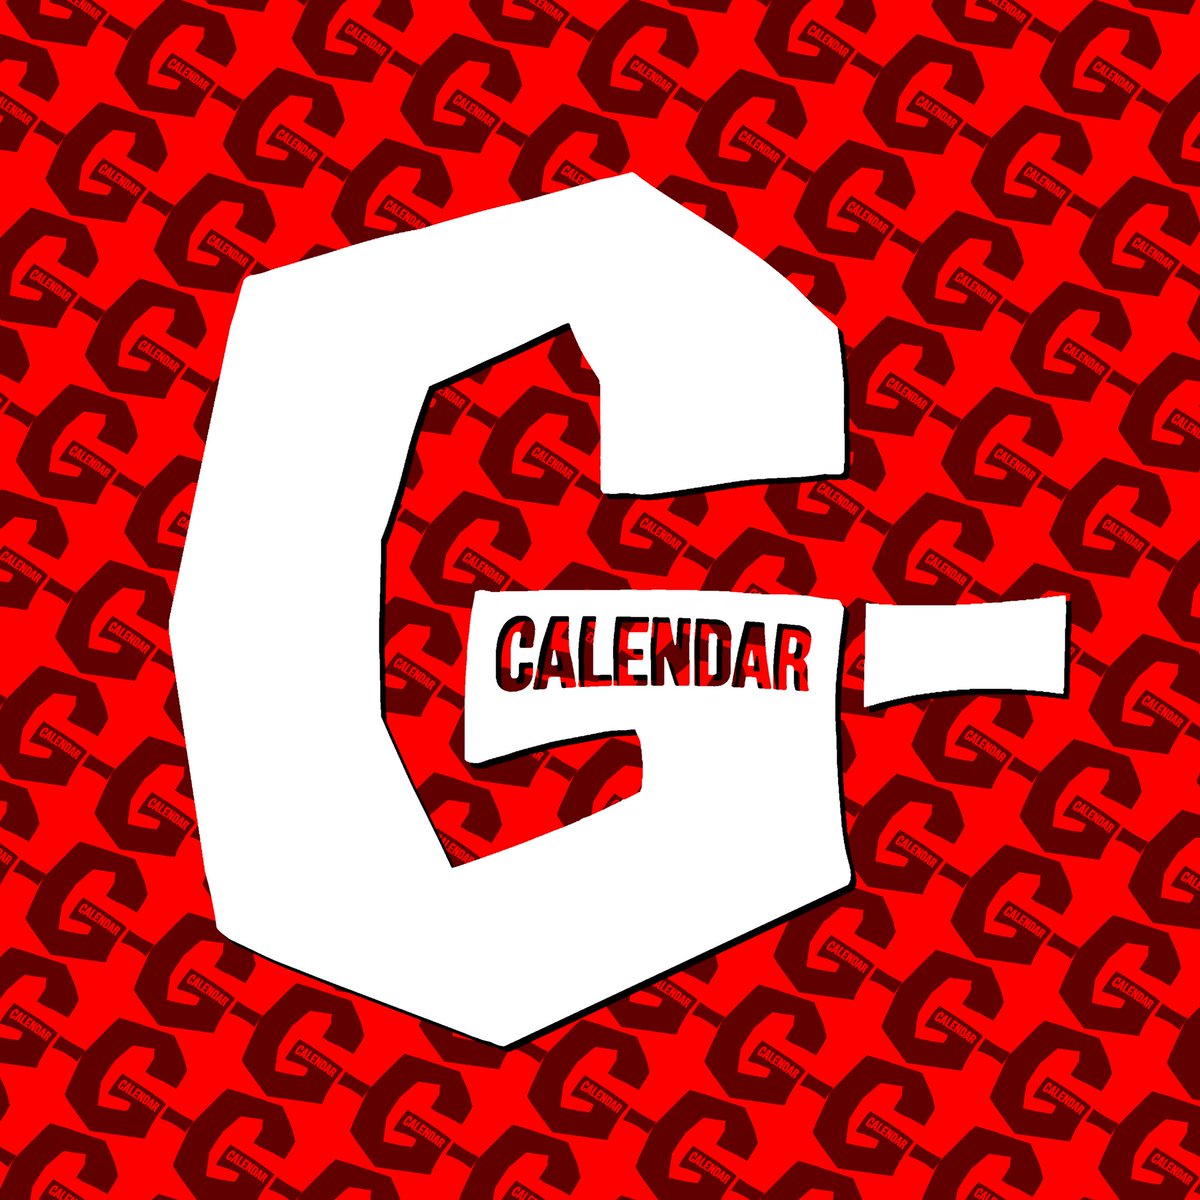 Hi, we're collecting in a single calendar🗓️ all the dates that are somehow related to @gorillaz. For each month, we will make a separate list of dates, diluting it all with announcements and news. Stay tuned➡️ #gorillaz #gz_calendar